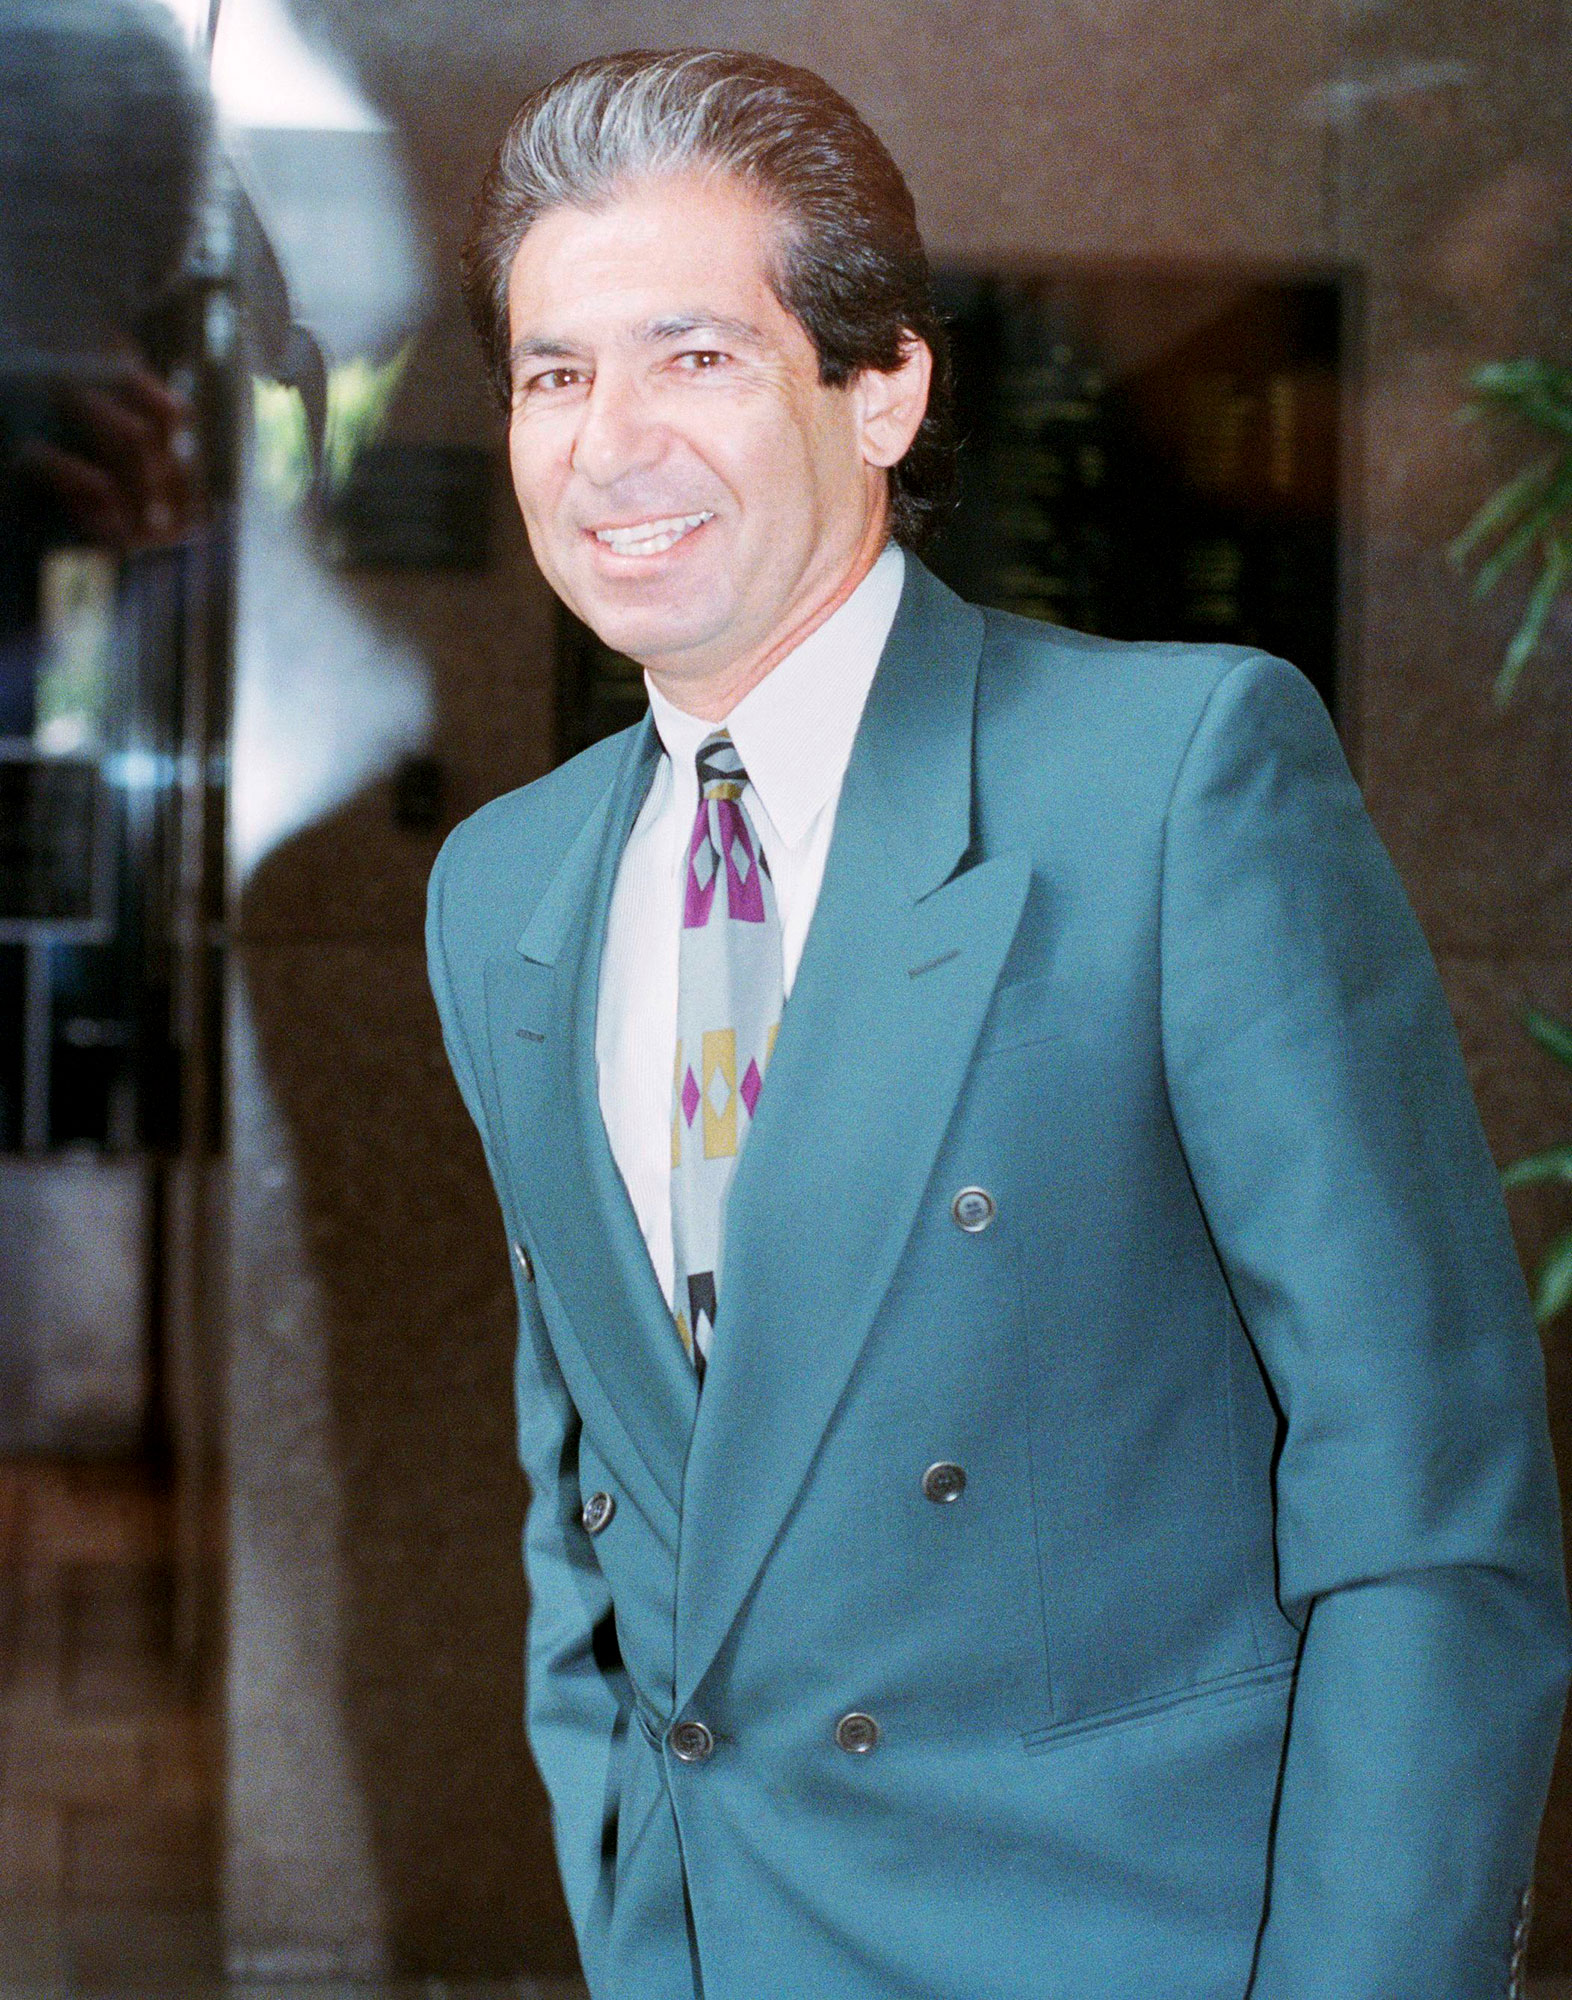 The Kardashian Family Most Heart-Wrenching Quotes About the Late Robert Kardashian